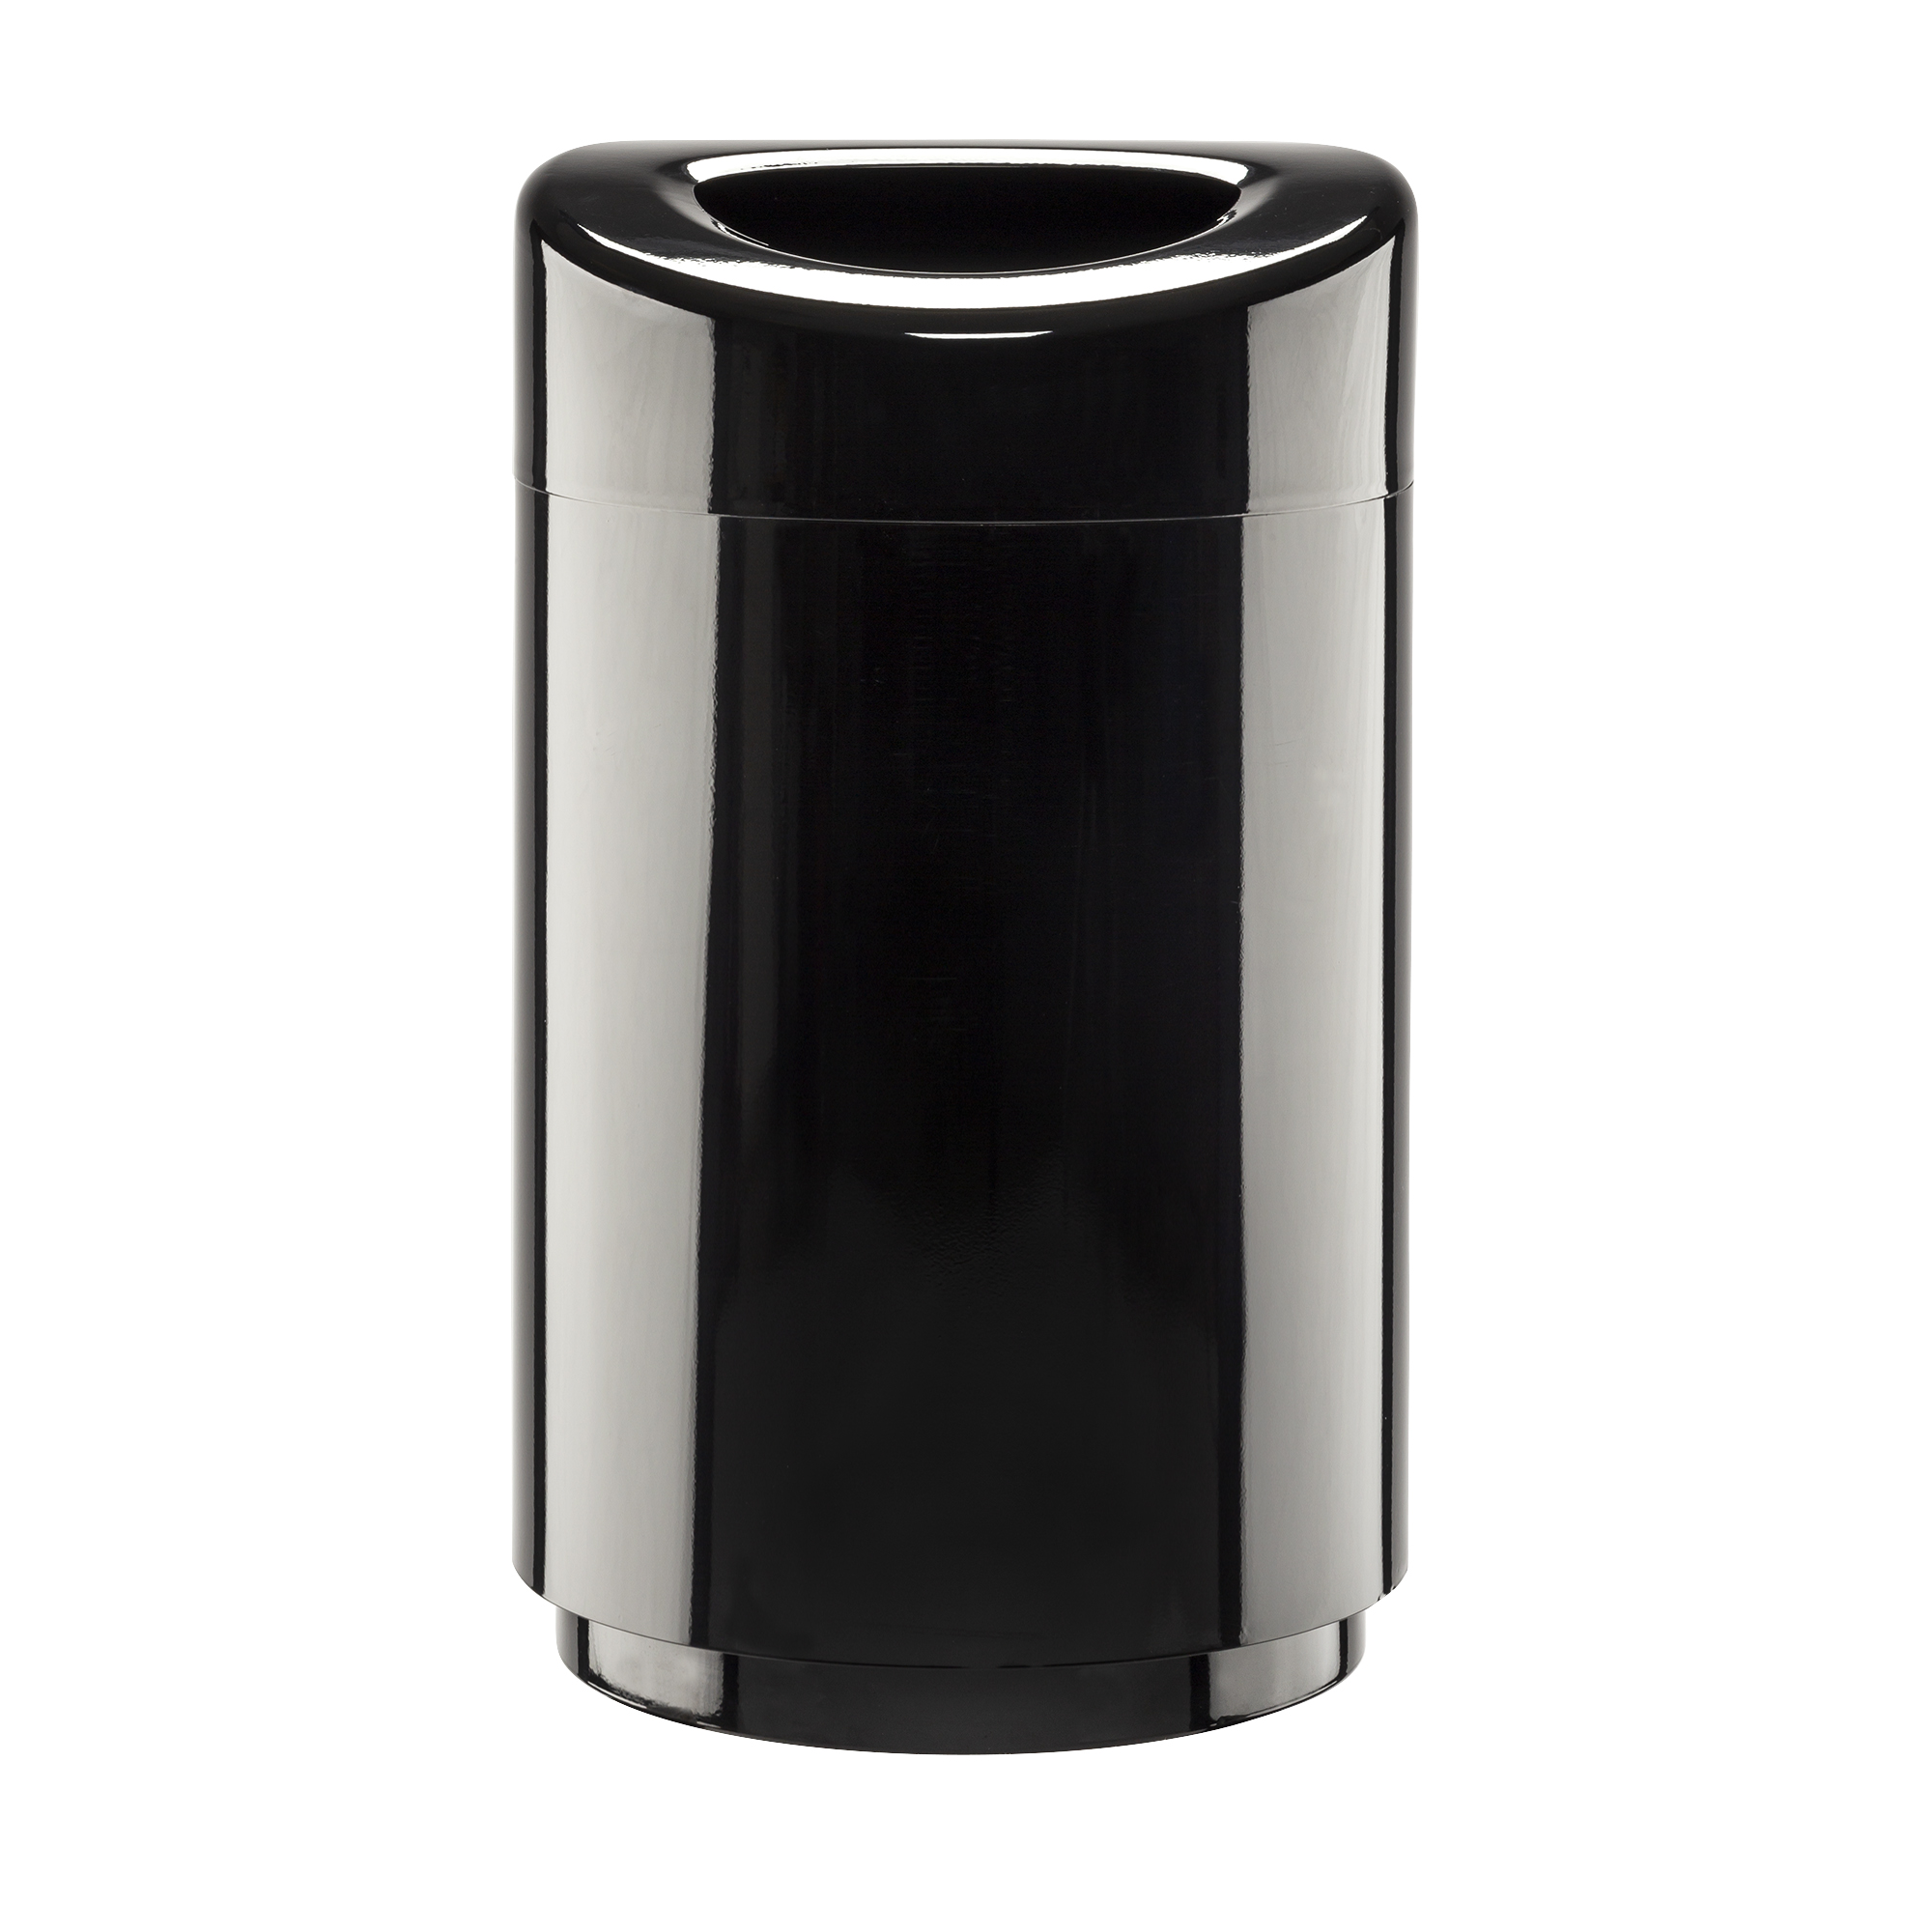 Safco Canmeleon Square Side-Open Receptacle, Black (38 gal)